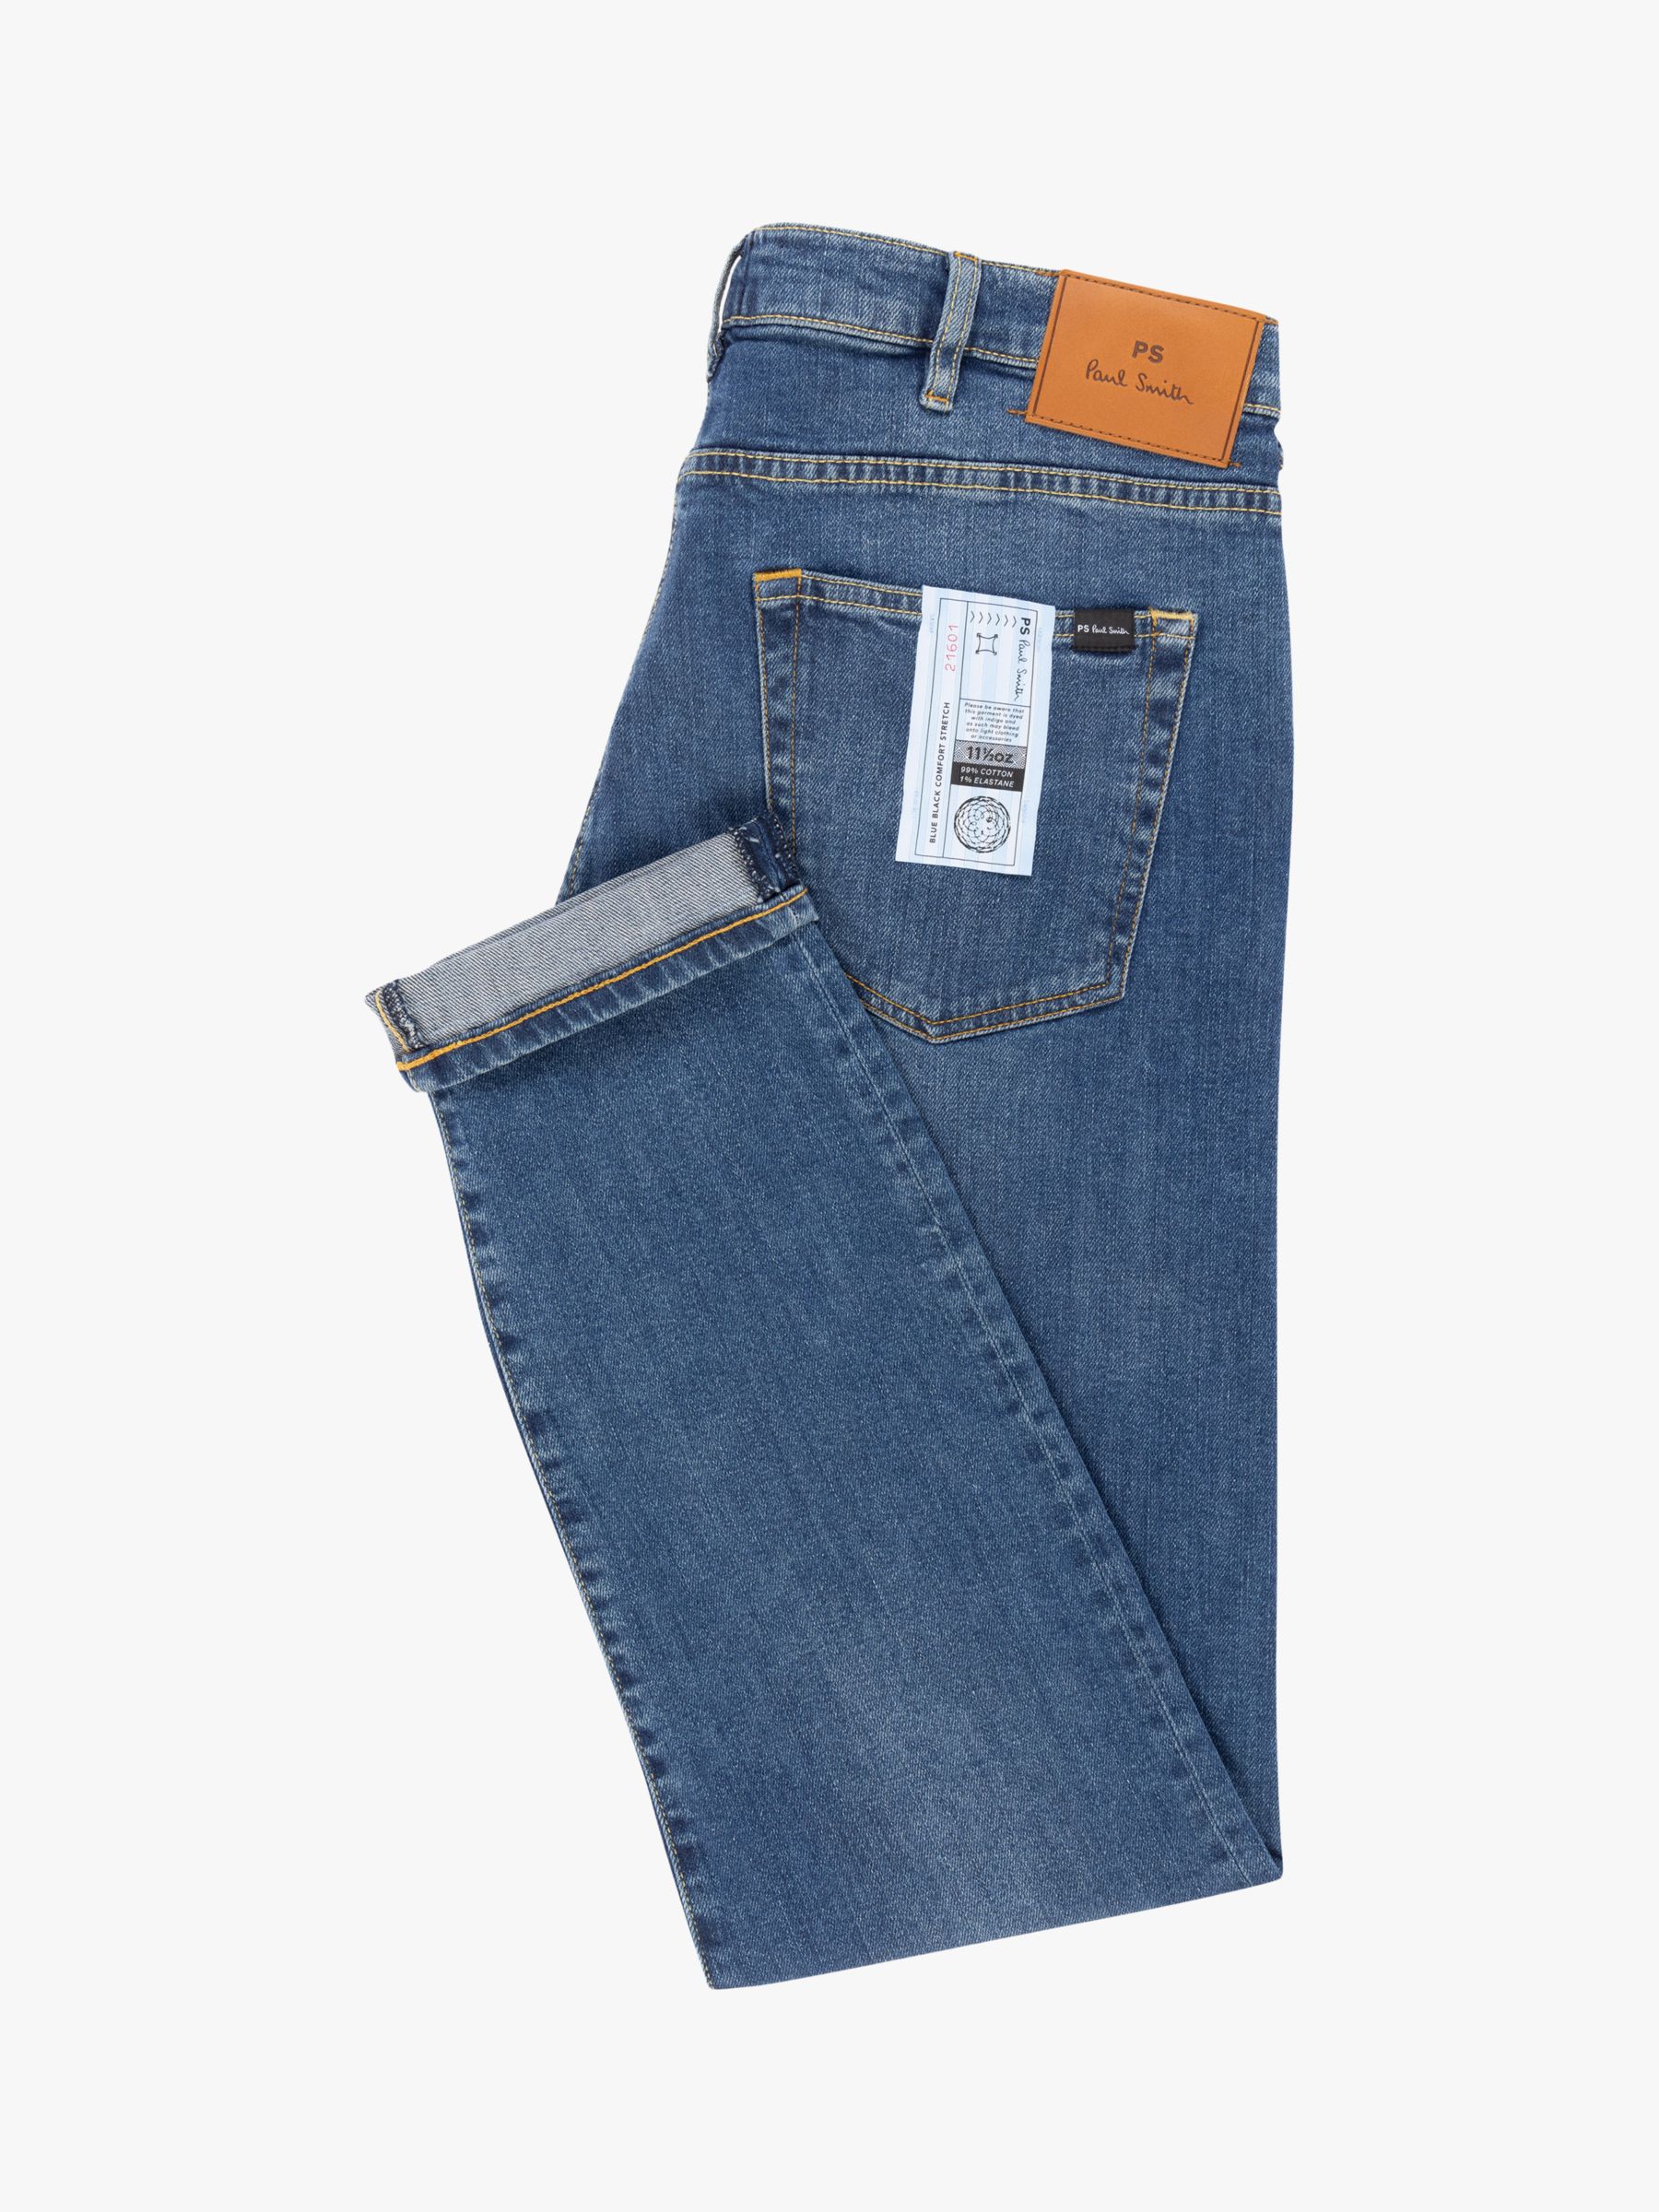 Paul Smith Tapered Fit Jeans, Blue at John Lewis & Partners